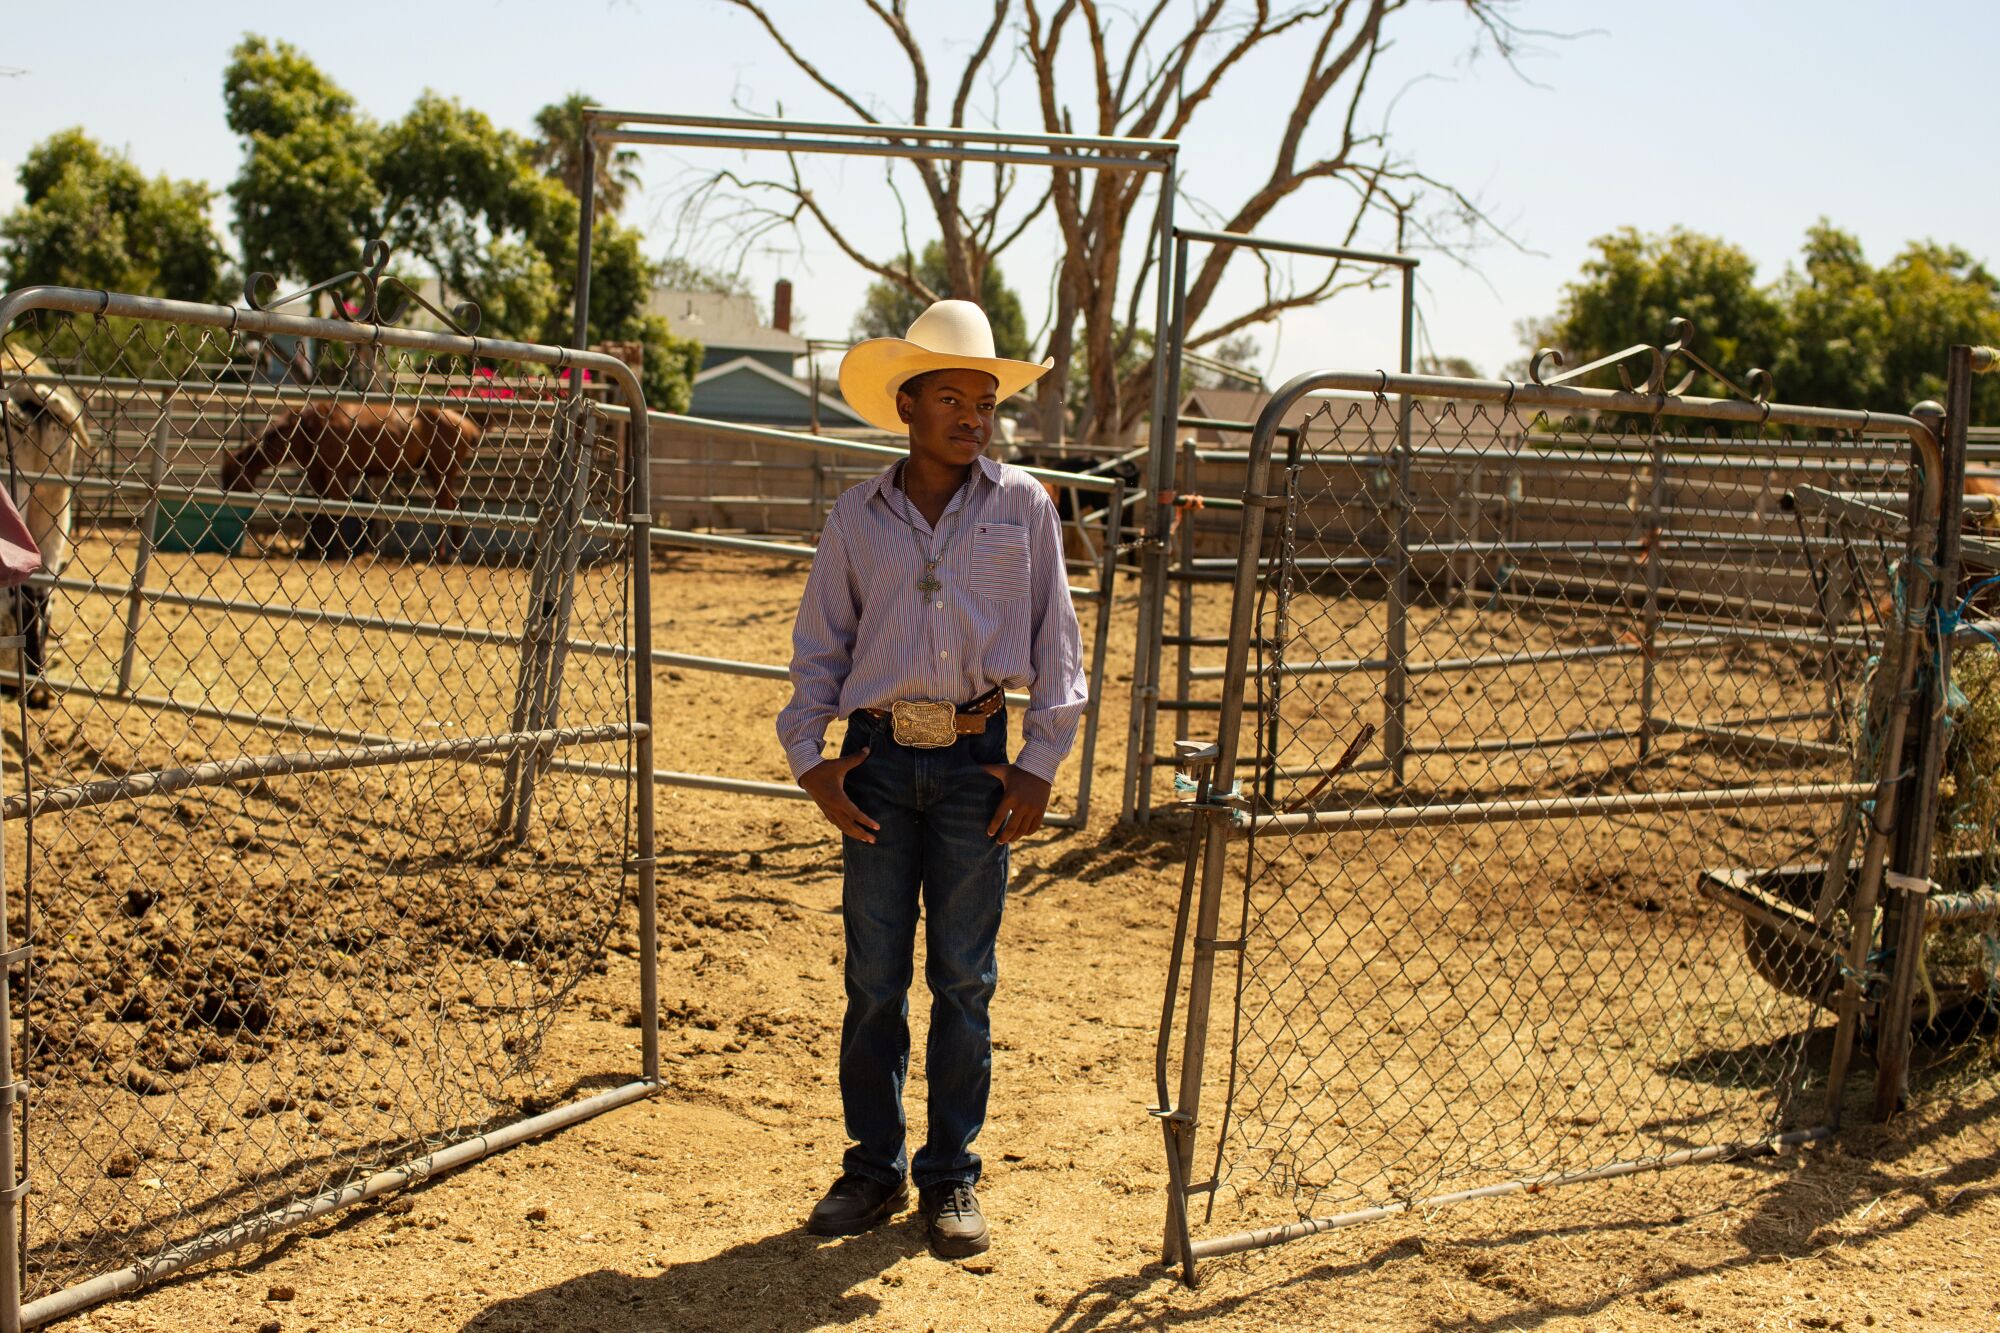 A young cowboy standing by metal gates outside a corral with a horse inside